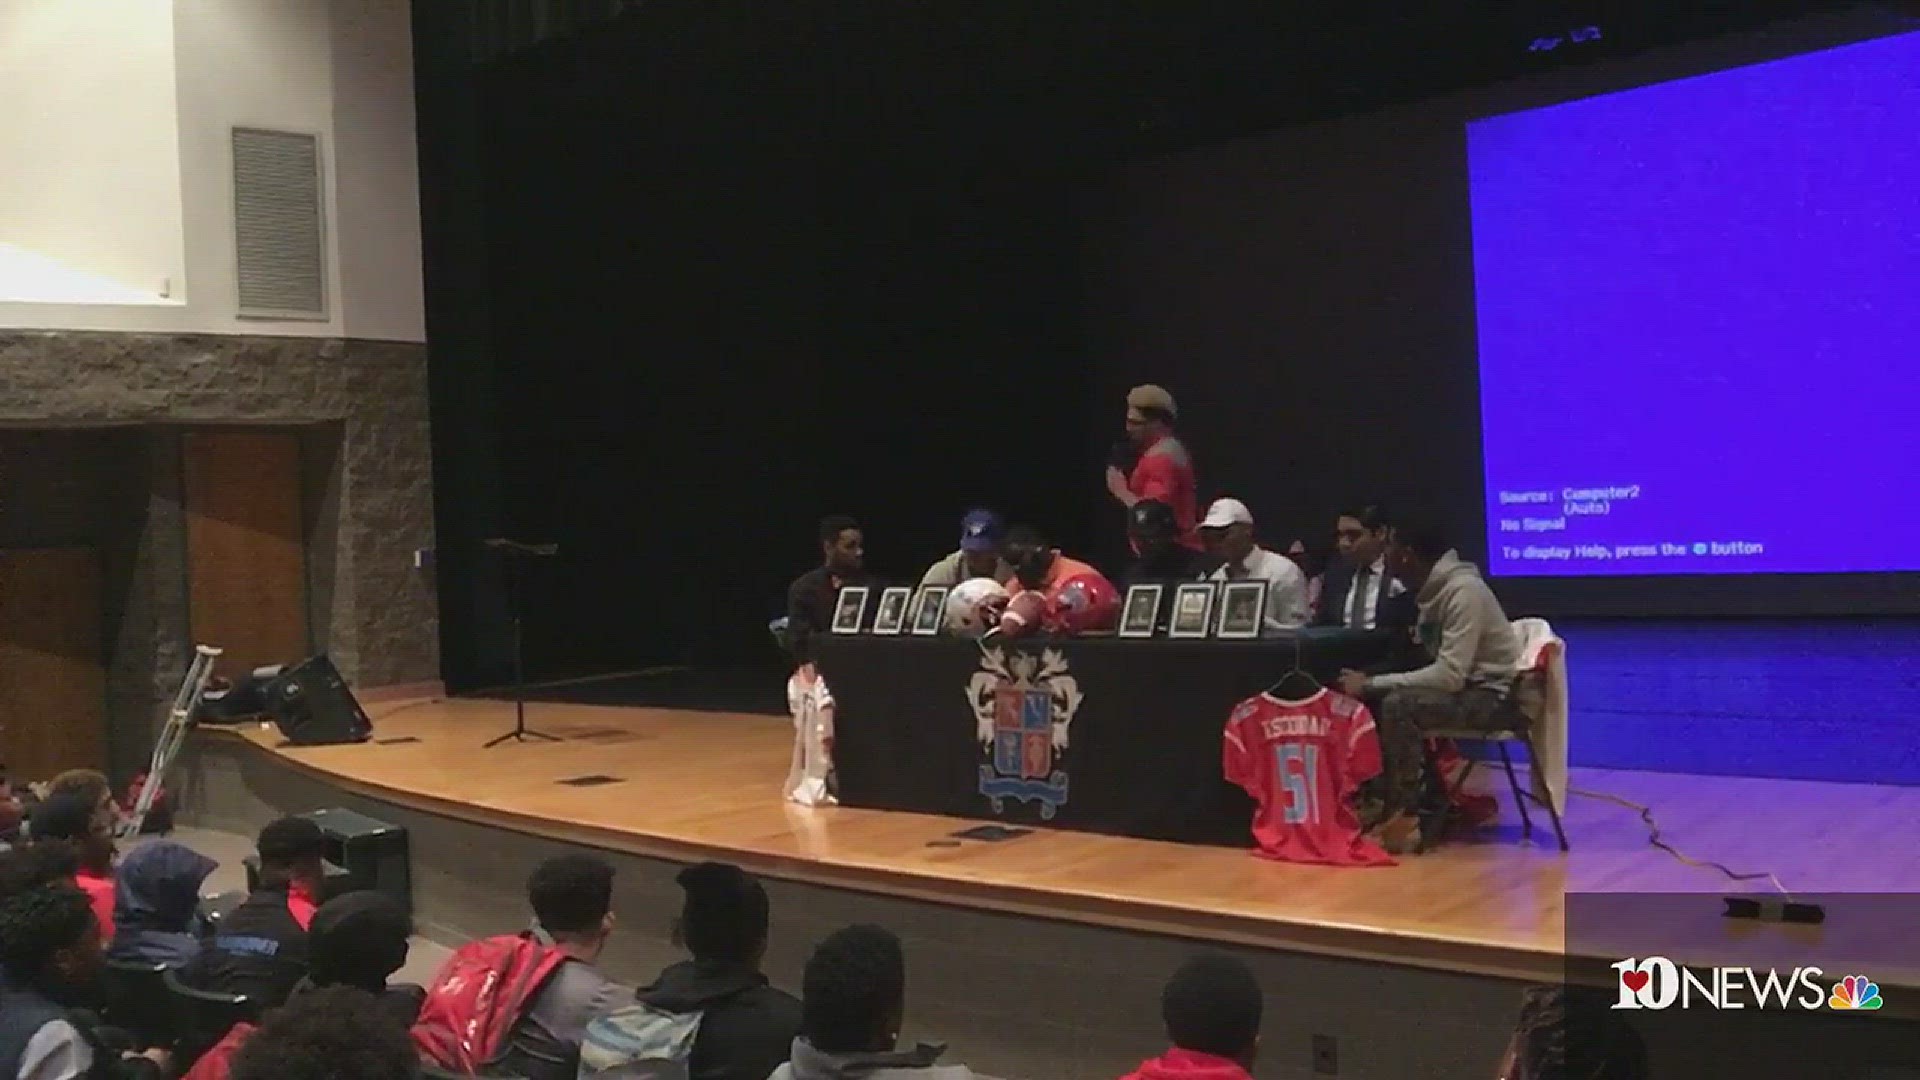 Austin-East had 7 athletes to play collegiate football on Signing Day.